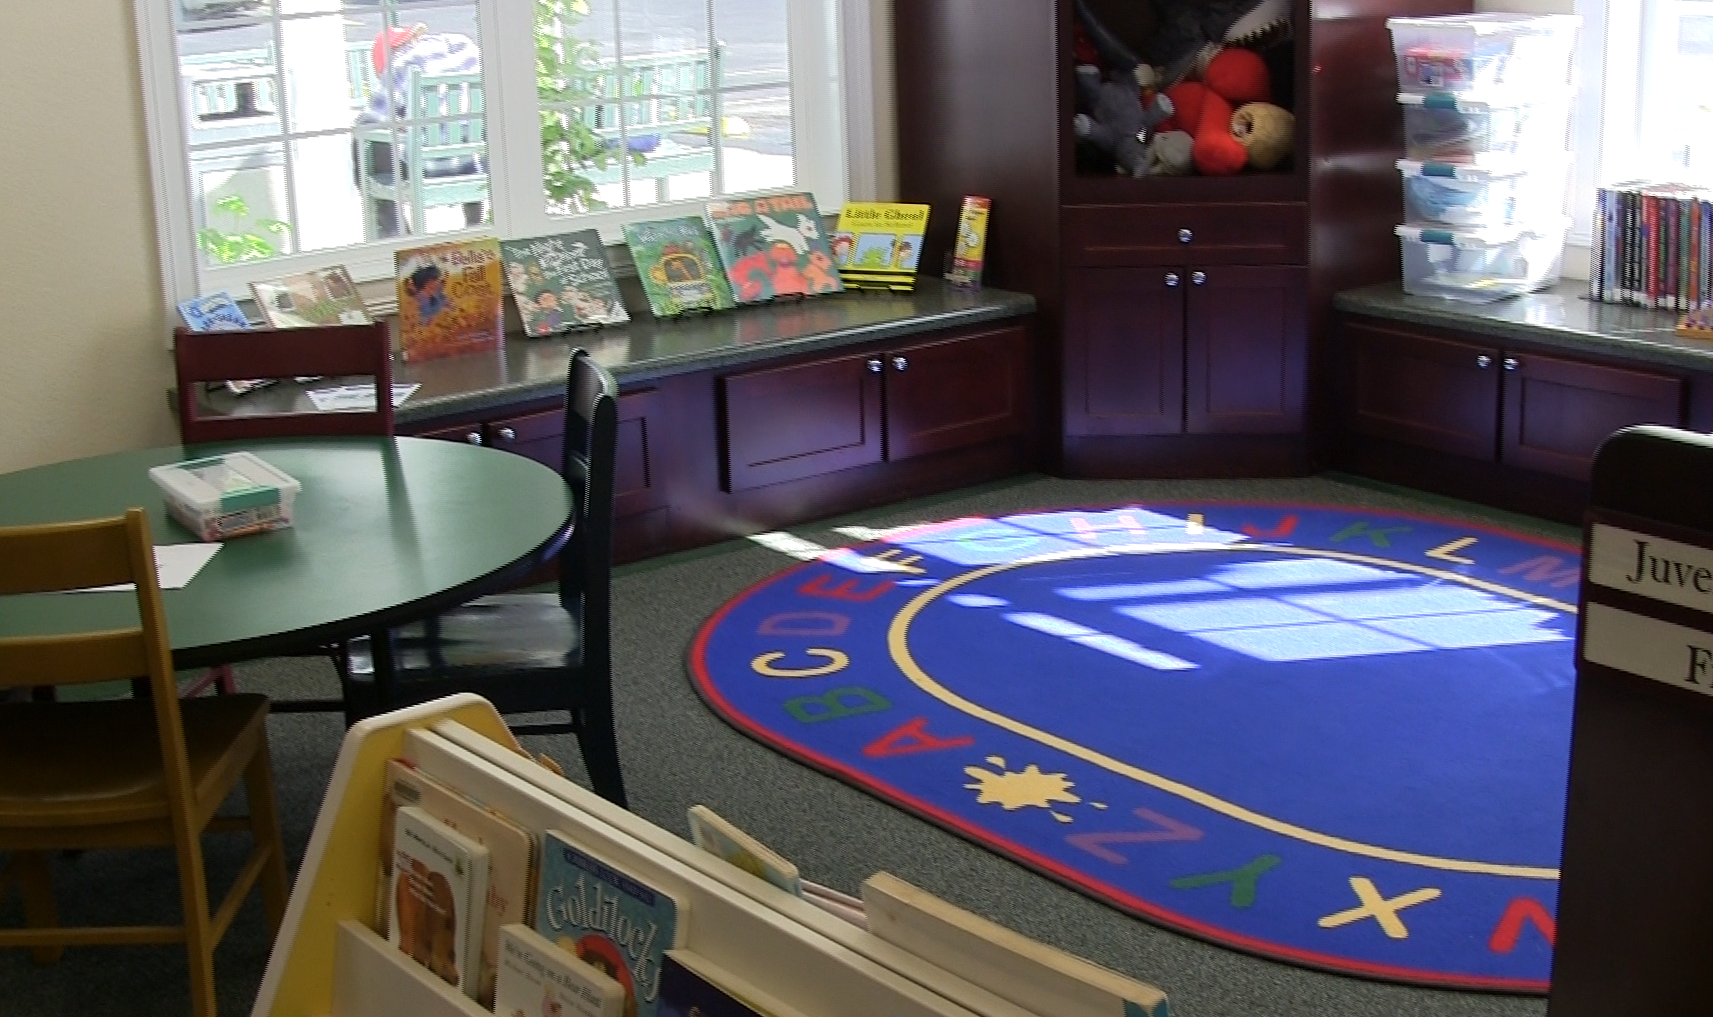 Childrens books and a colorful rug